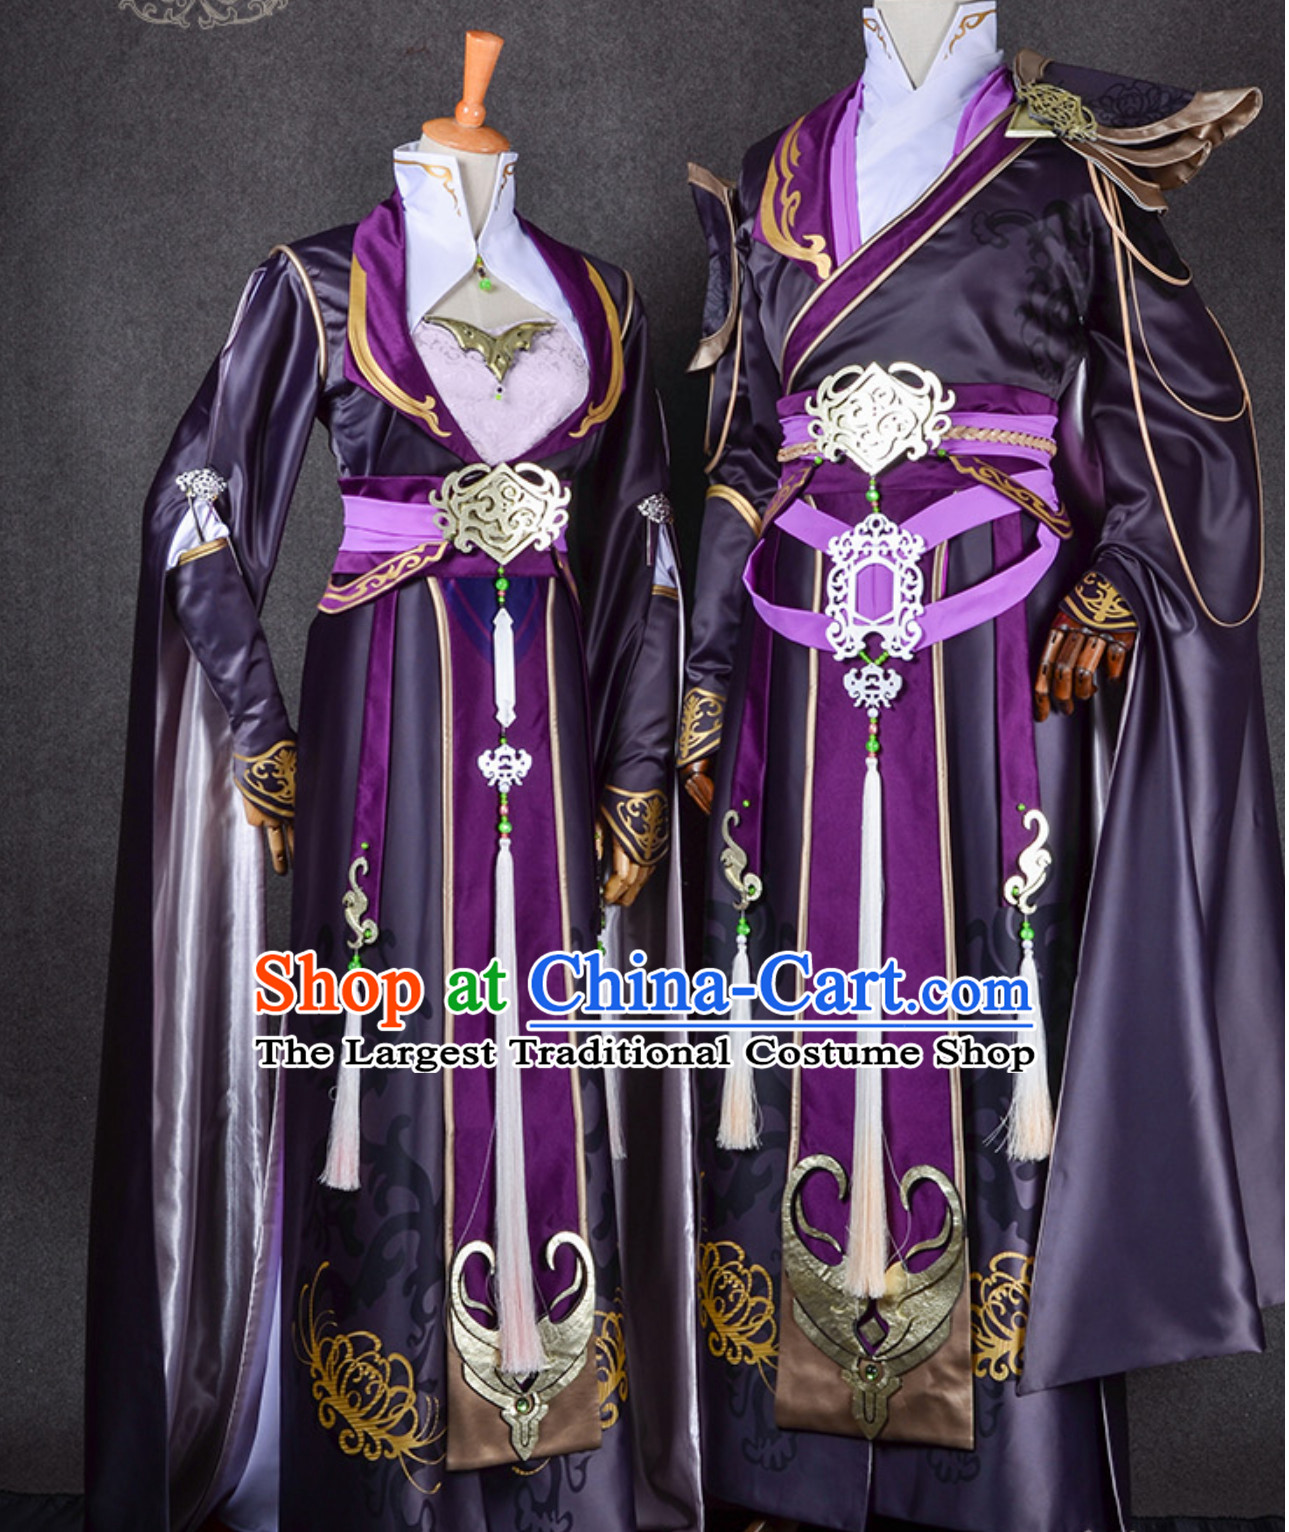 Ancient Chinese Swordsman Swordswoman Cosplay Superhero Costumes 2 Complete Sets for TV Show Film or Performance